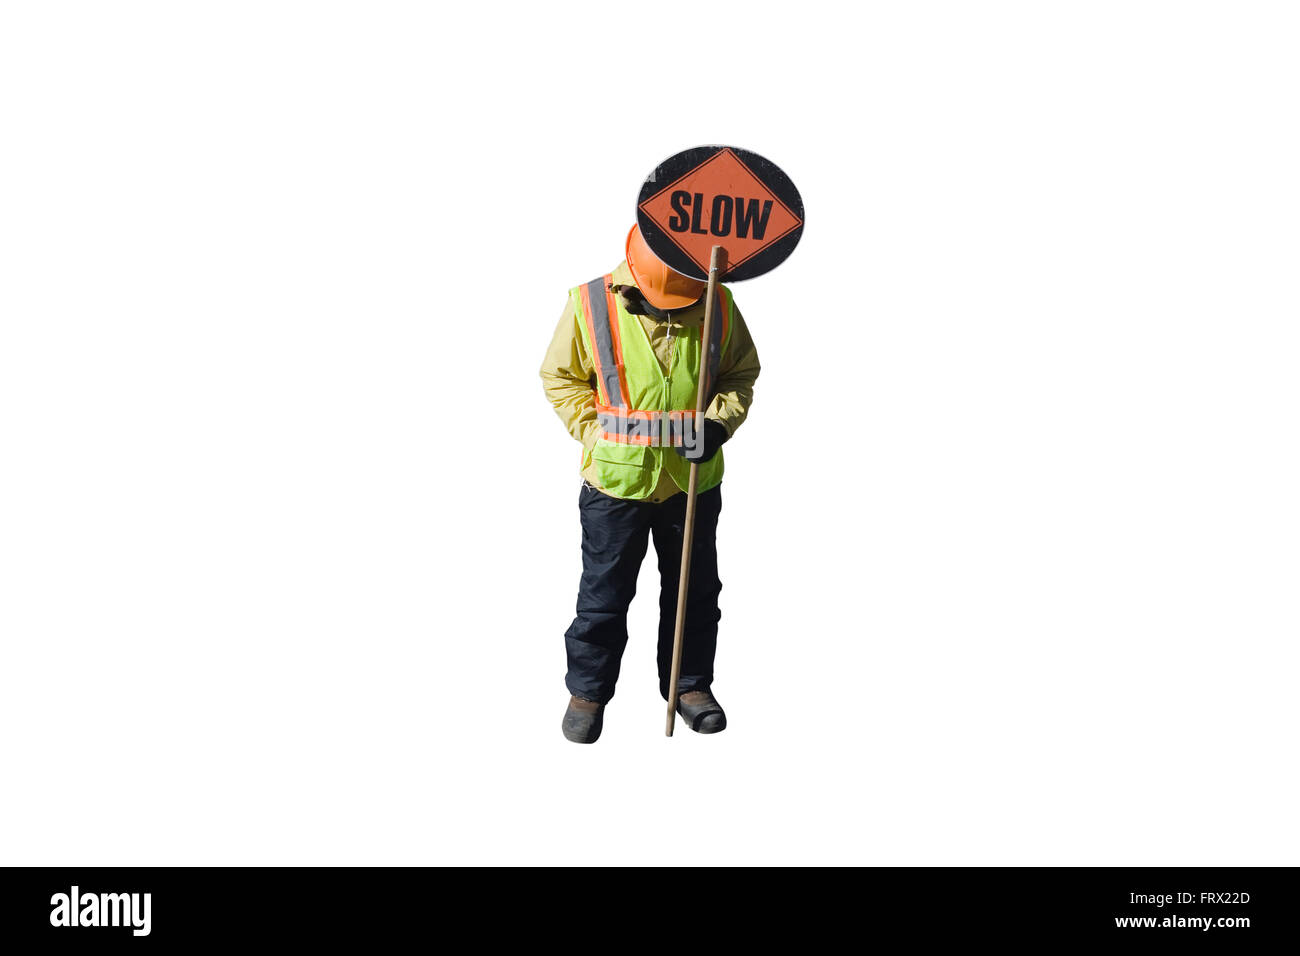 Cut Out. Construction Worker with a hardhat and an orange reflective vest holds a round sign on a pole with SLOW printed on it Stock Photo